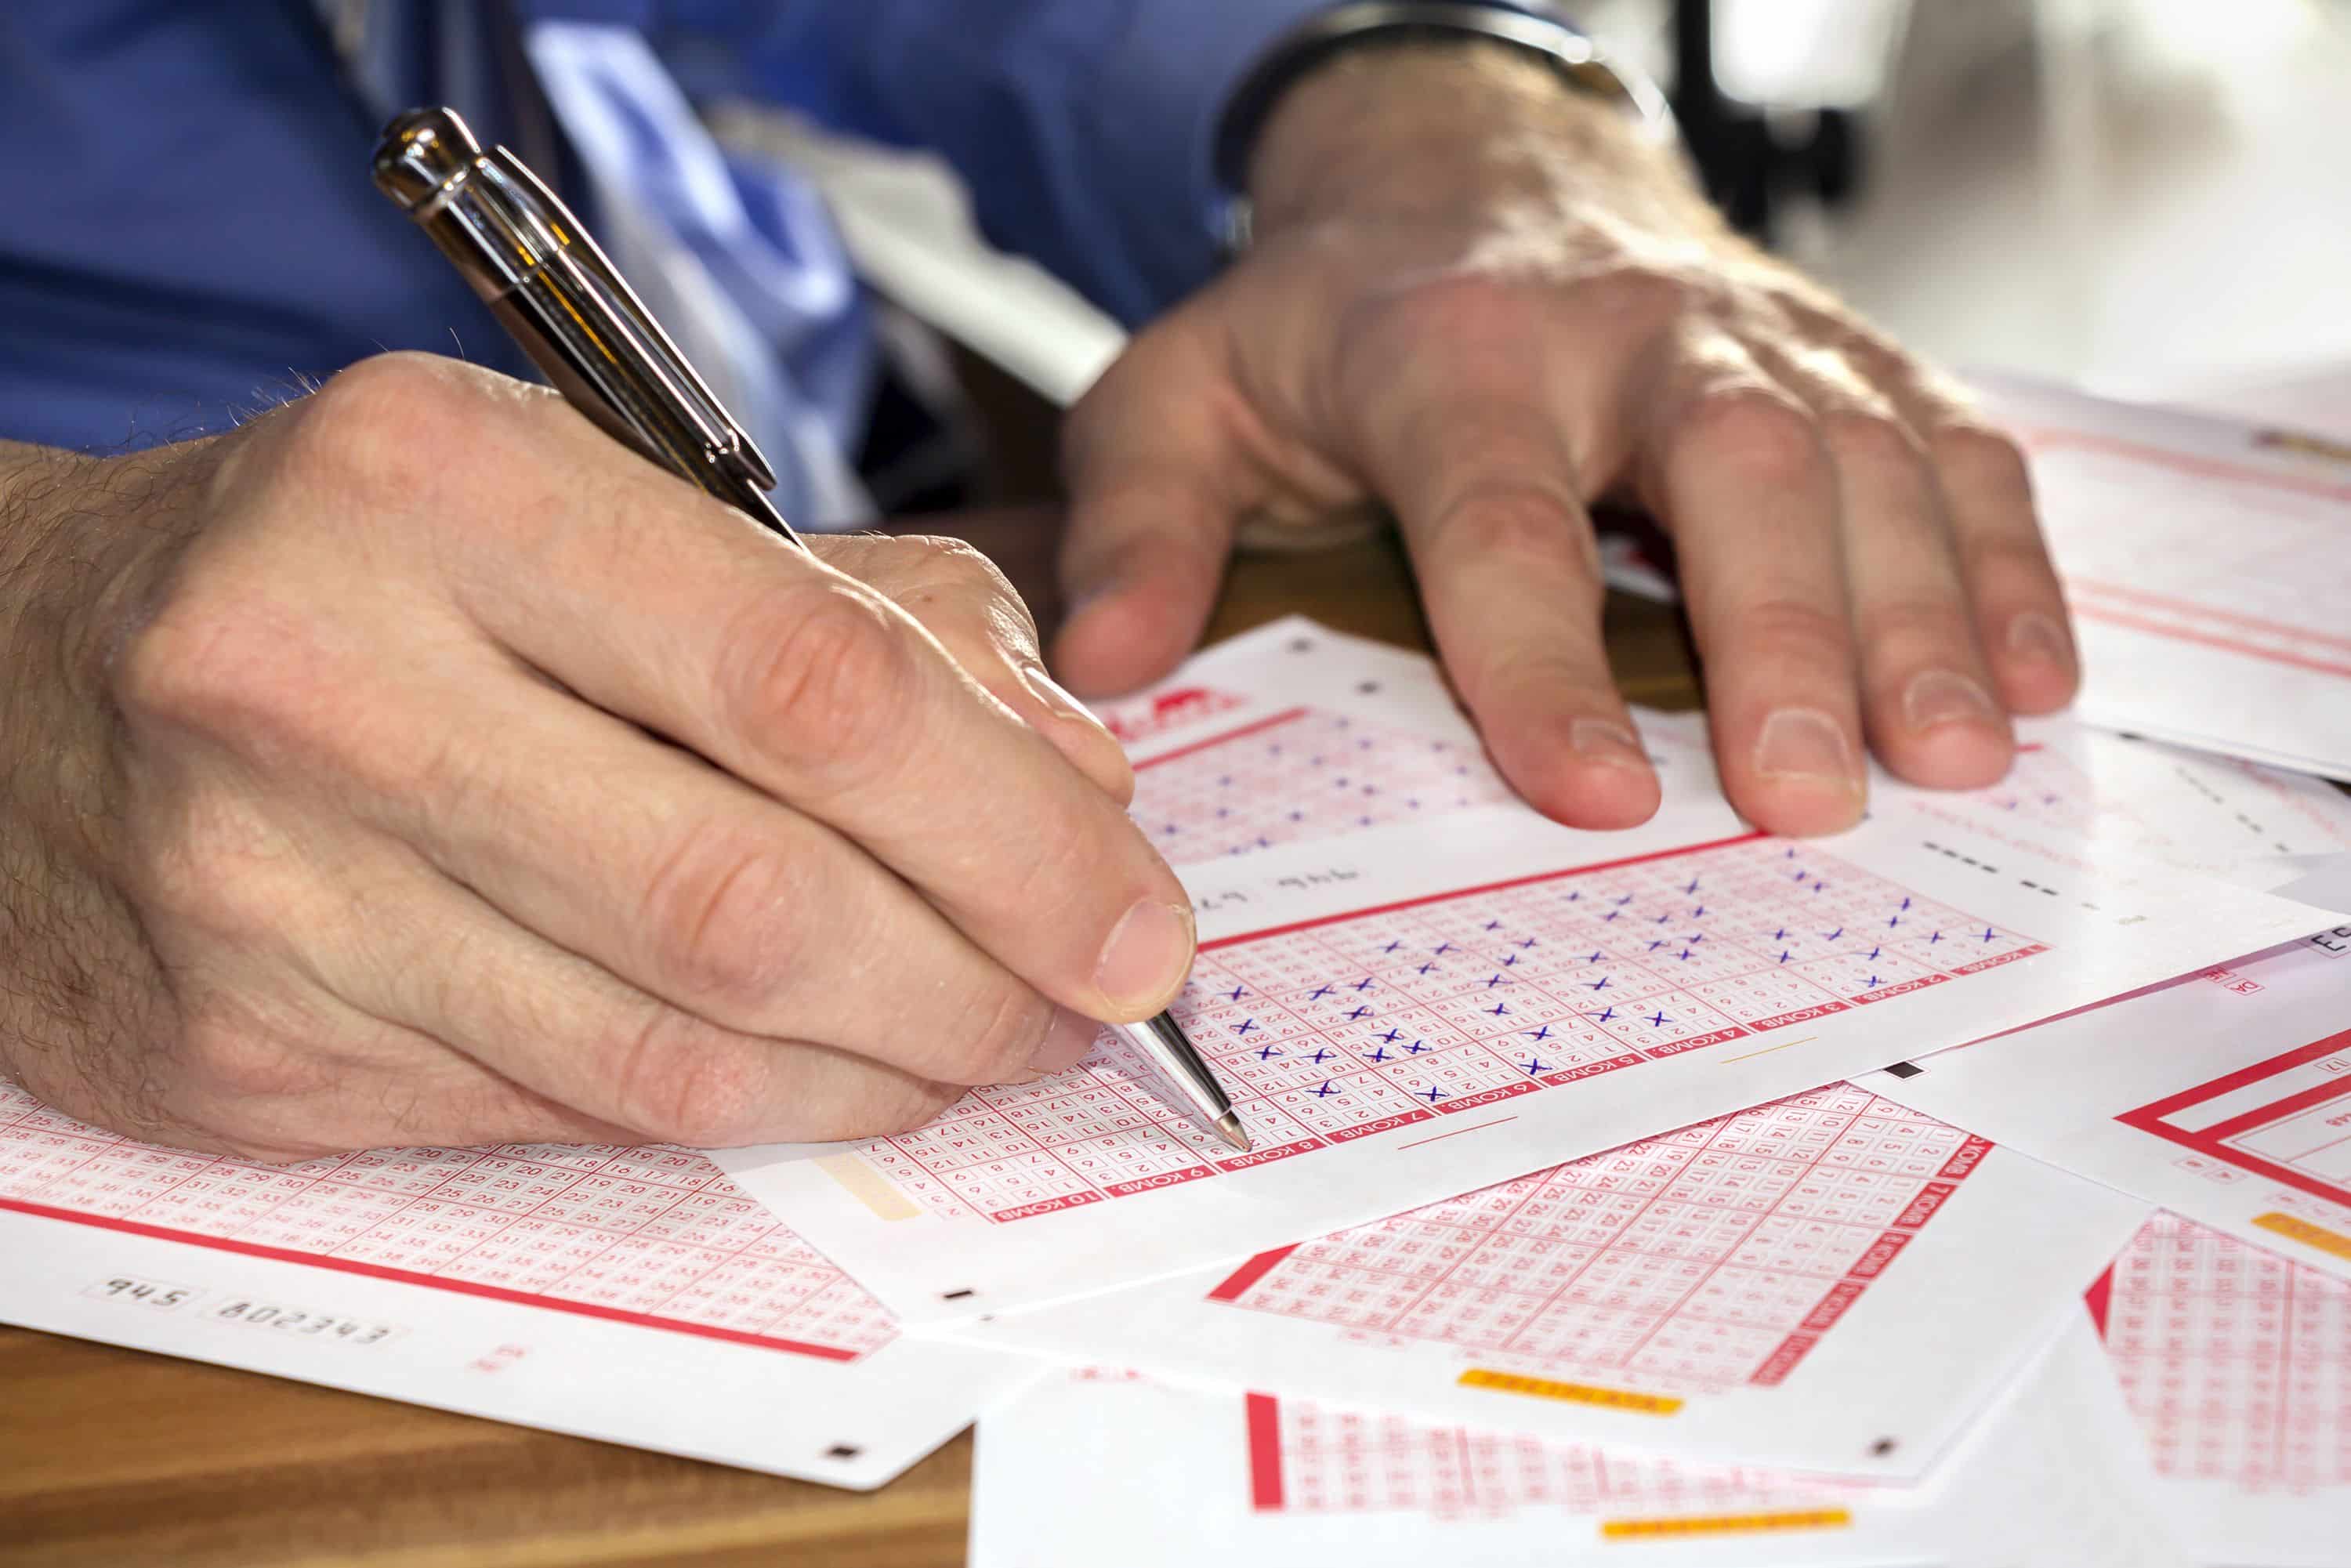 Man Marking on lottery ticket with a pen